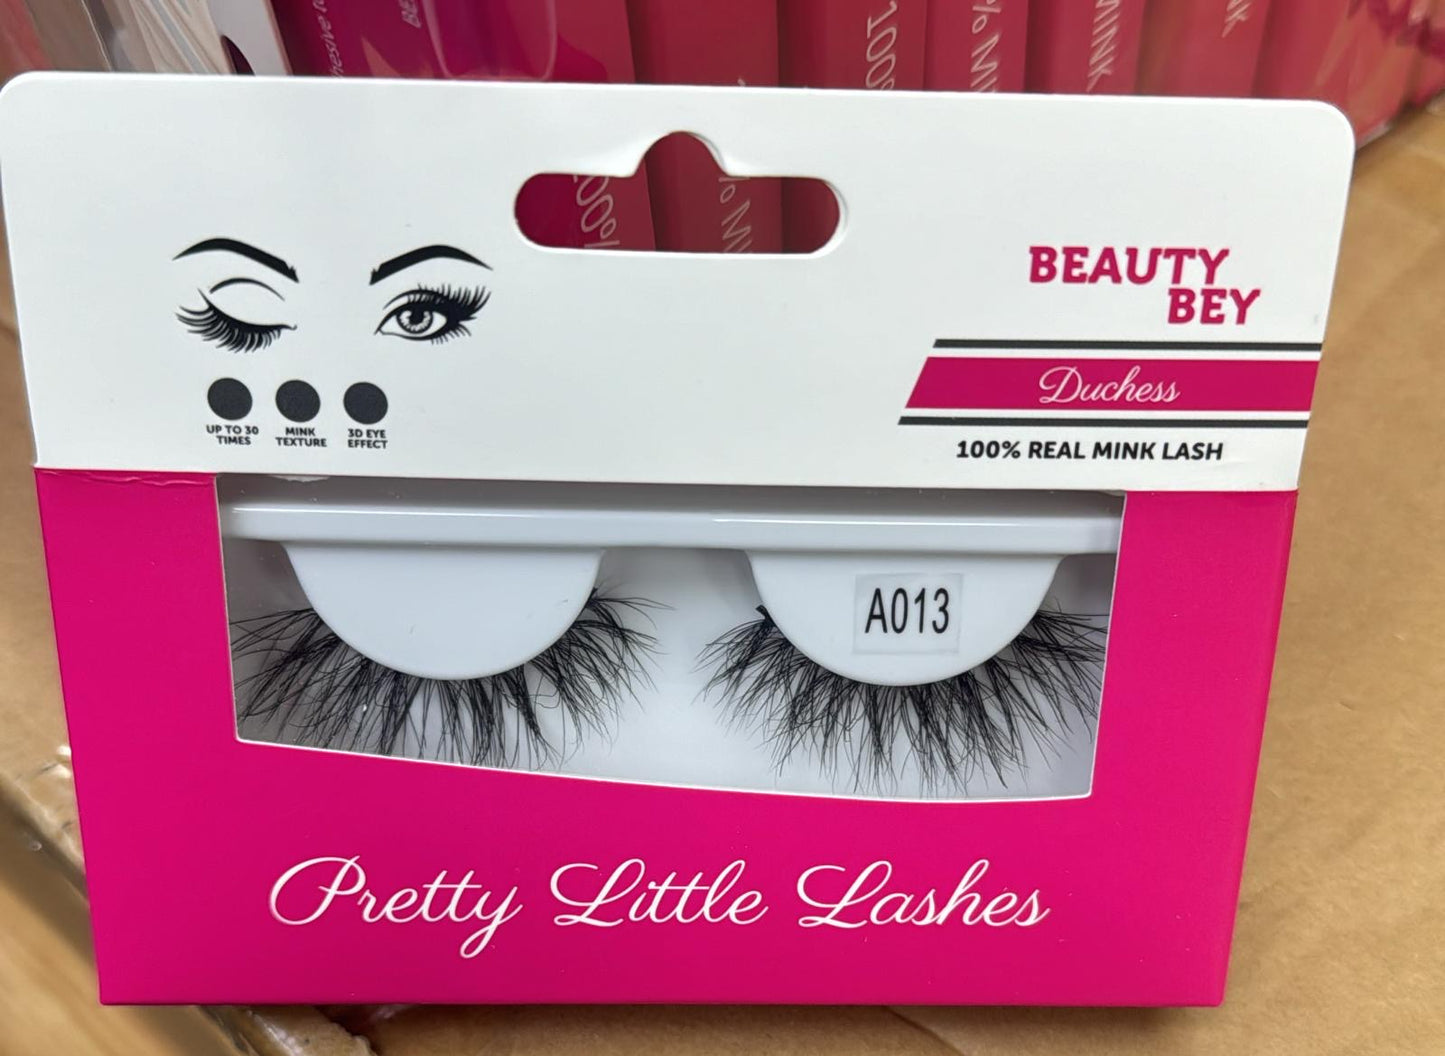 BEAUTY BEY - DUCHESS - 100% REAL MINK LASHES